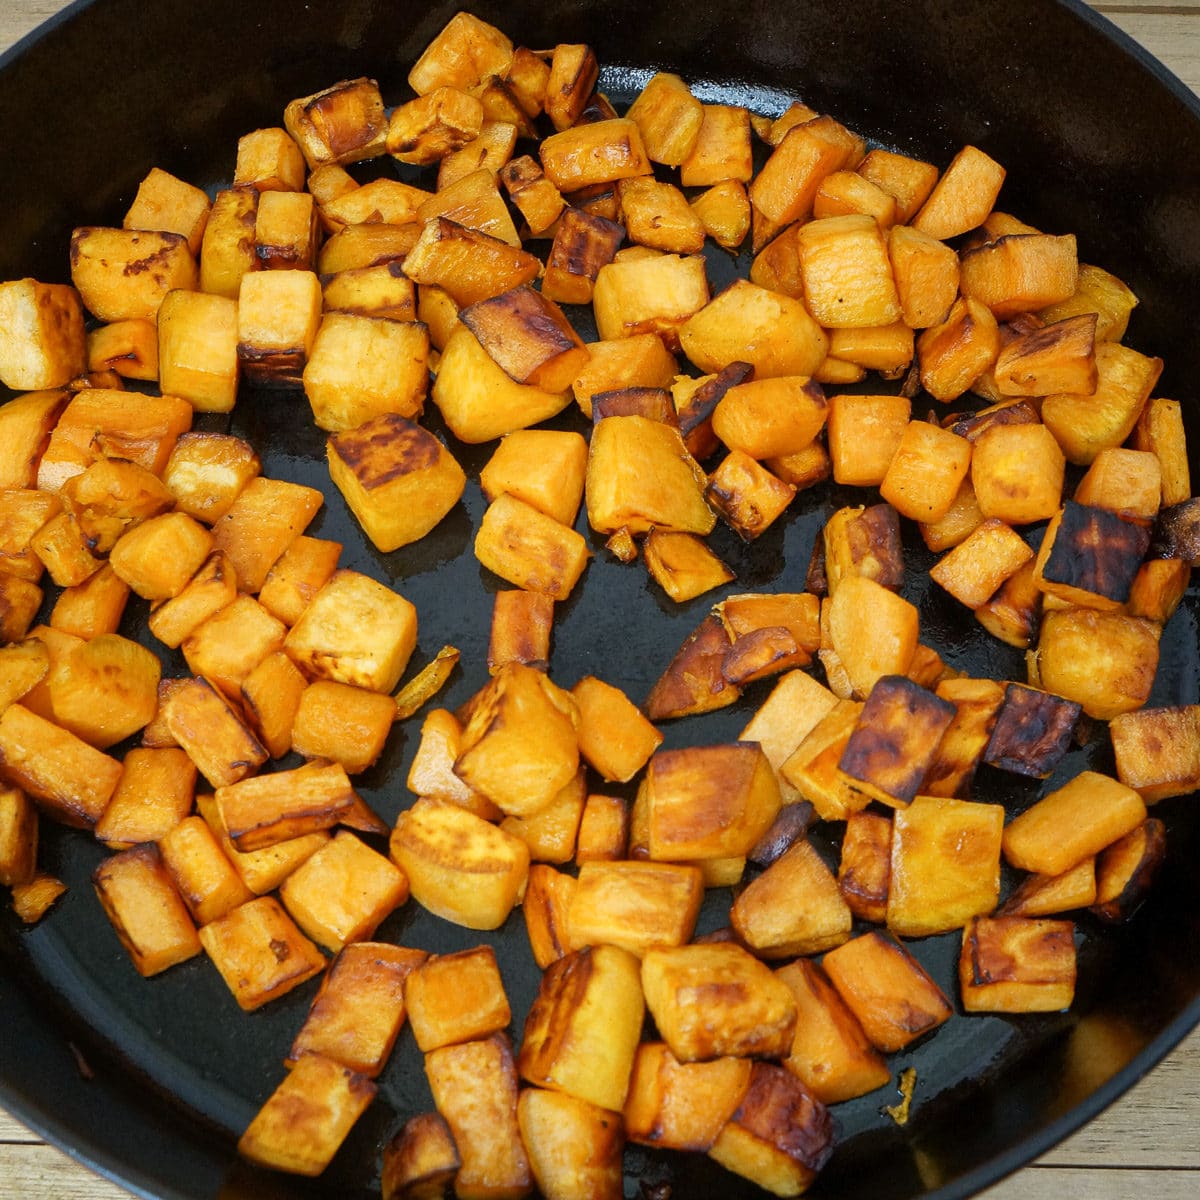 Cubed pan-seared sweet potatoes in a large cast iron pan.